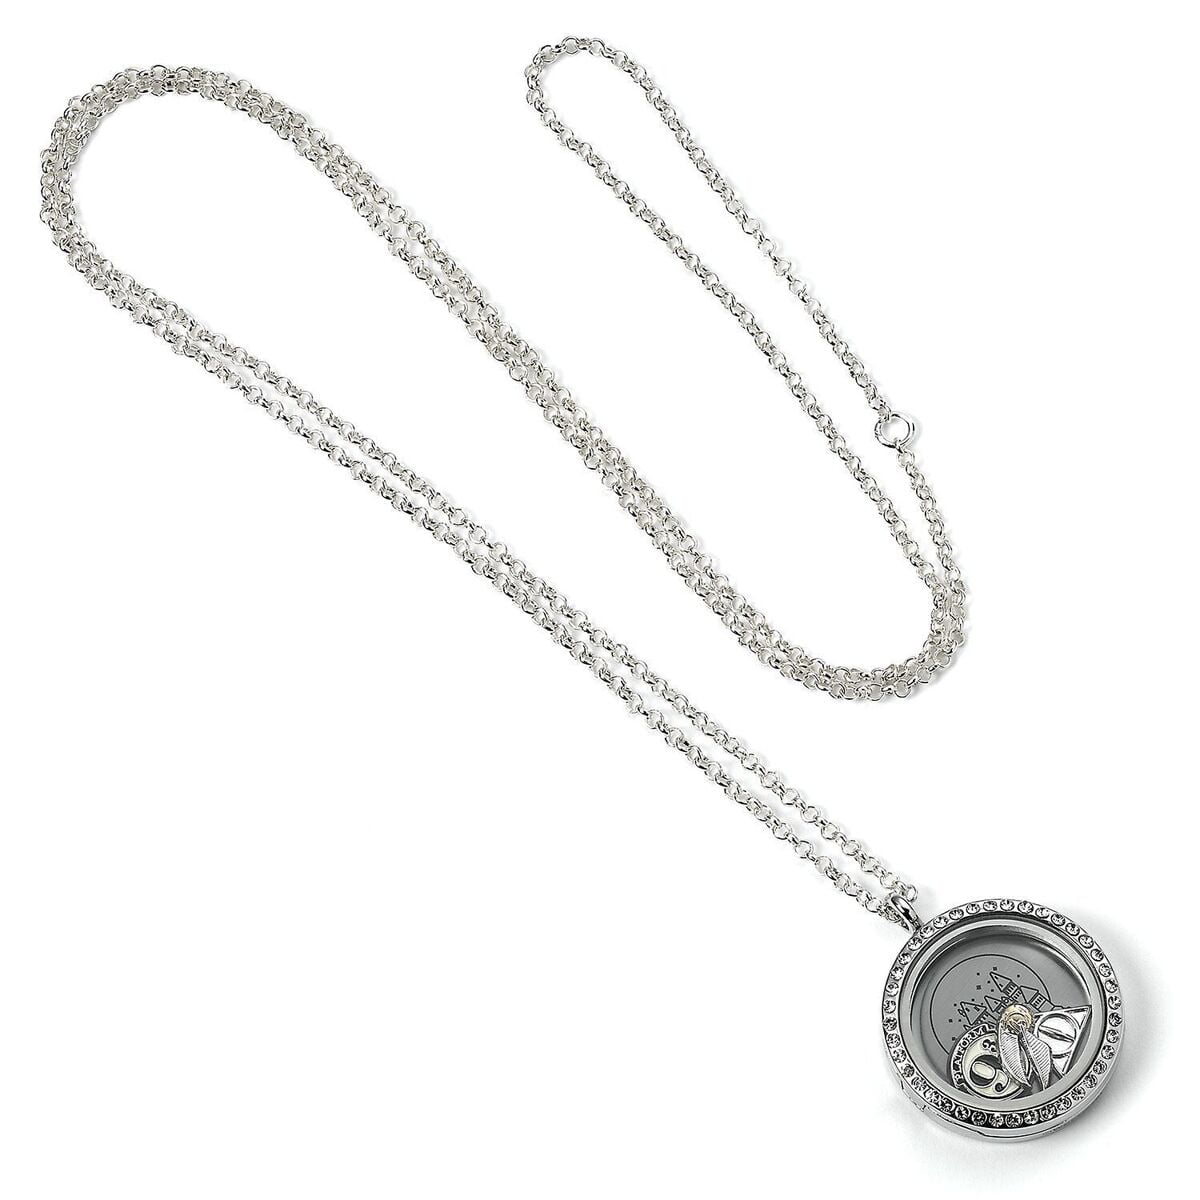 Buy Best Gift Floating Charm Living Memory Lockets with Birthstone, 30mm  Stainless Steel Necklace, Stainless Steel at Amazon.in